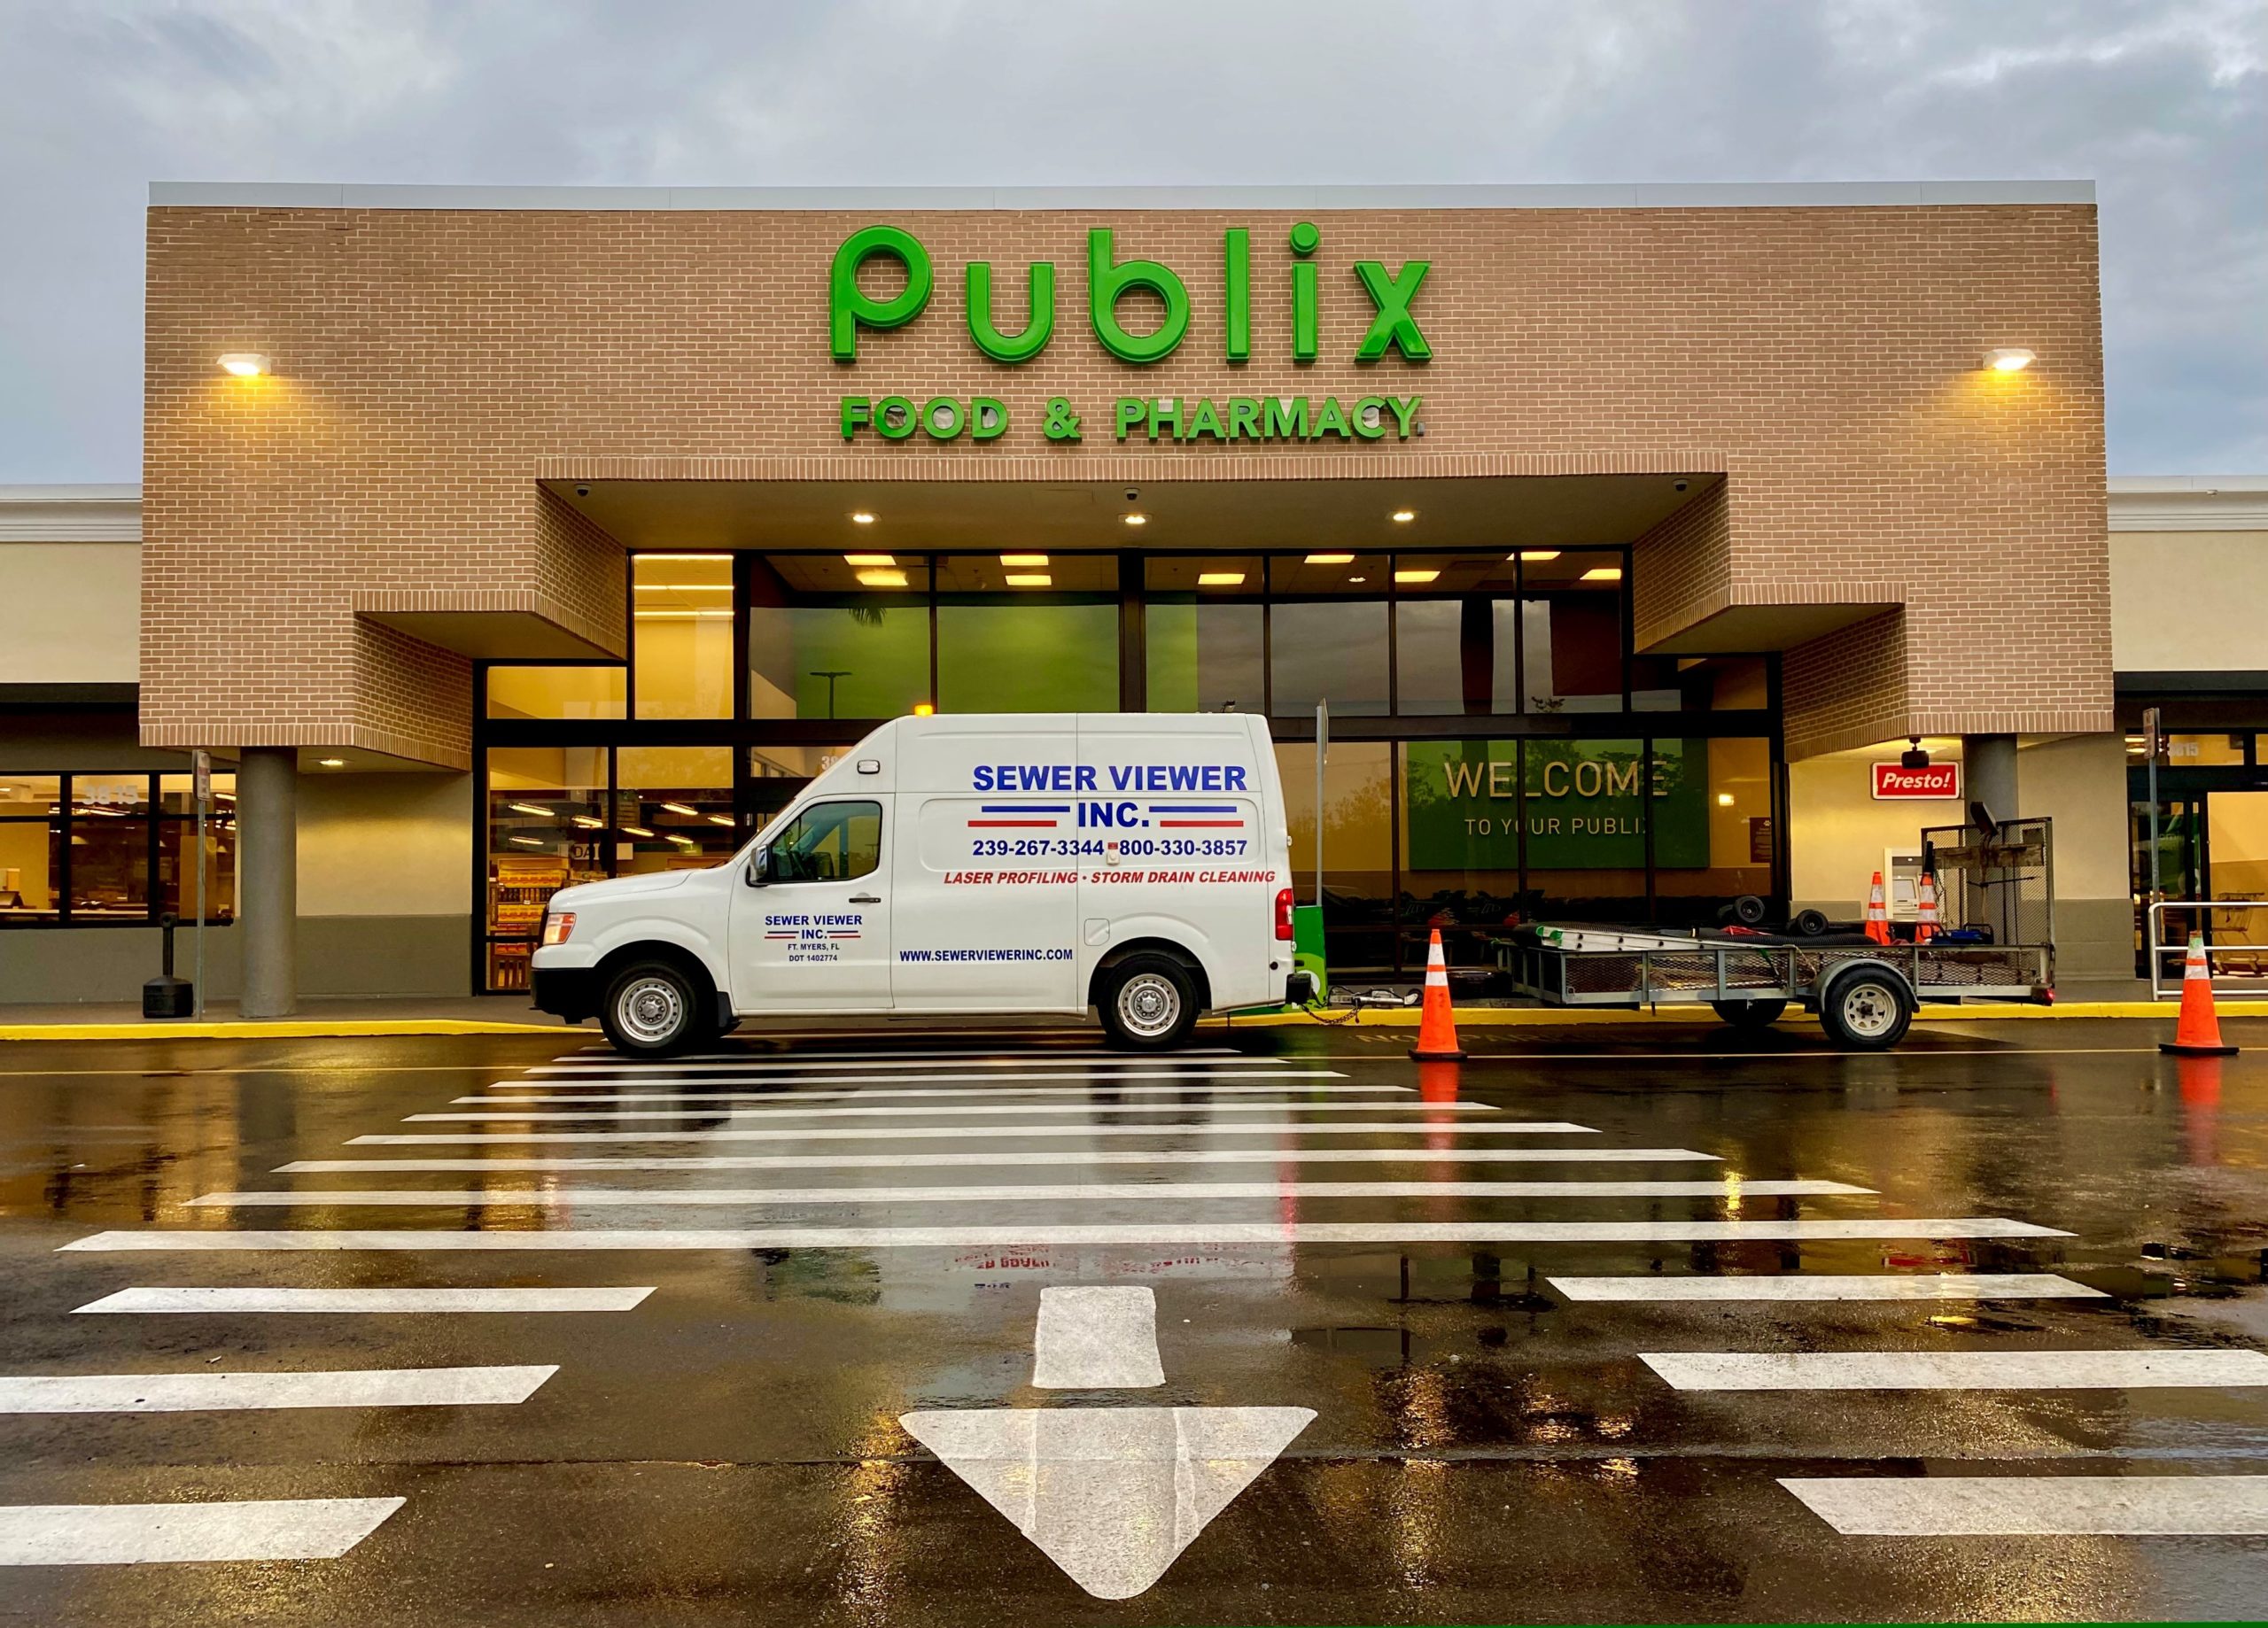 Tim Aten Knows: First regional Publix with Pours cafe opening Dec. 1